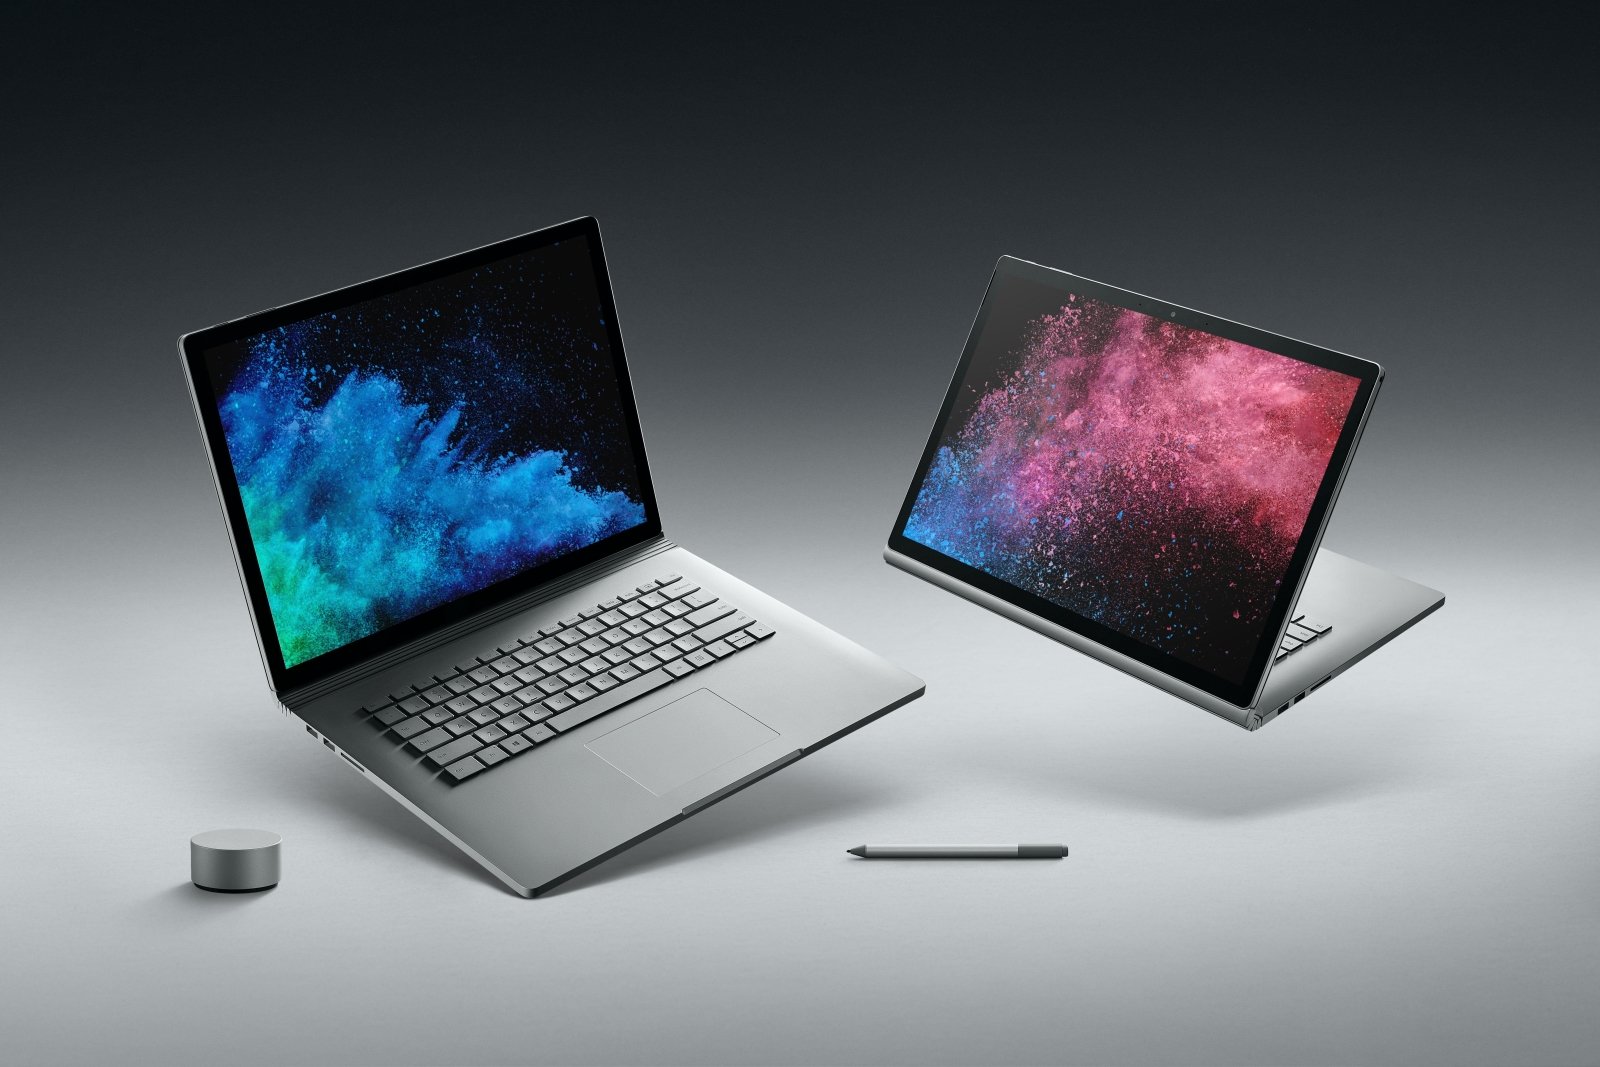 Microsoft announce new Surface Book 2 - Twice as powerful as latest MacBook Pro - Editors Keys